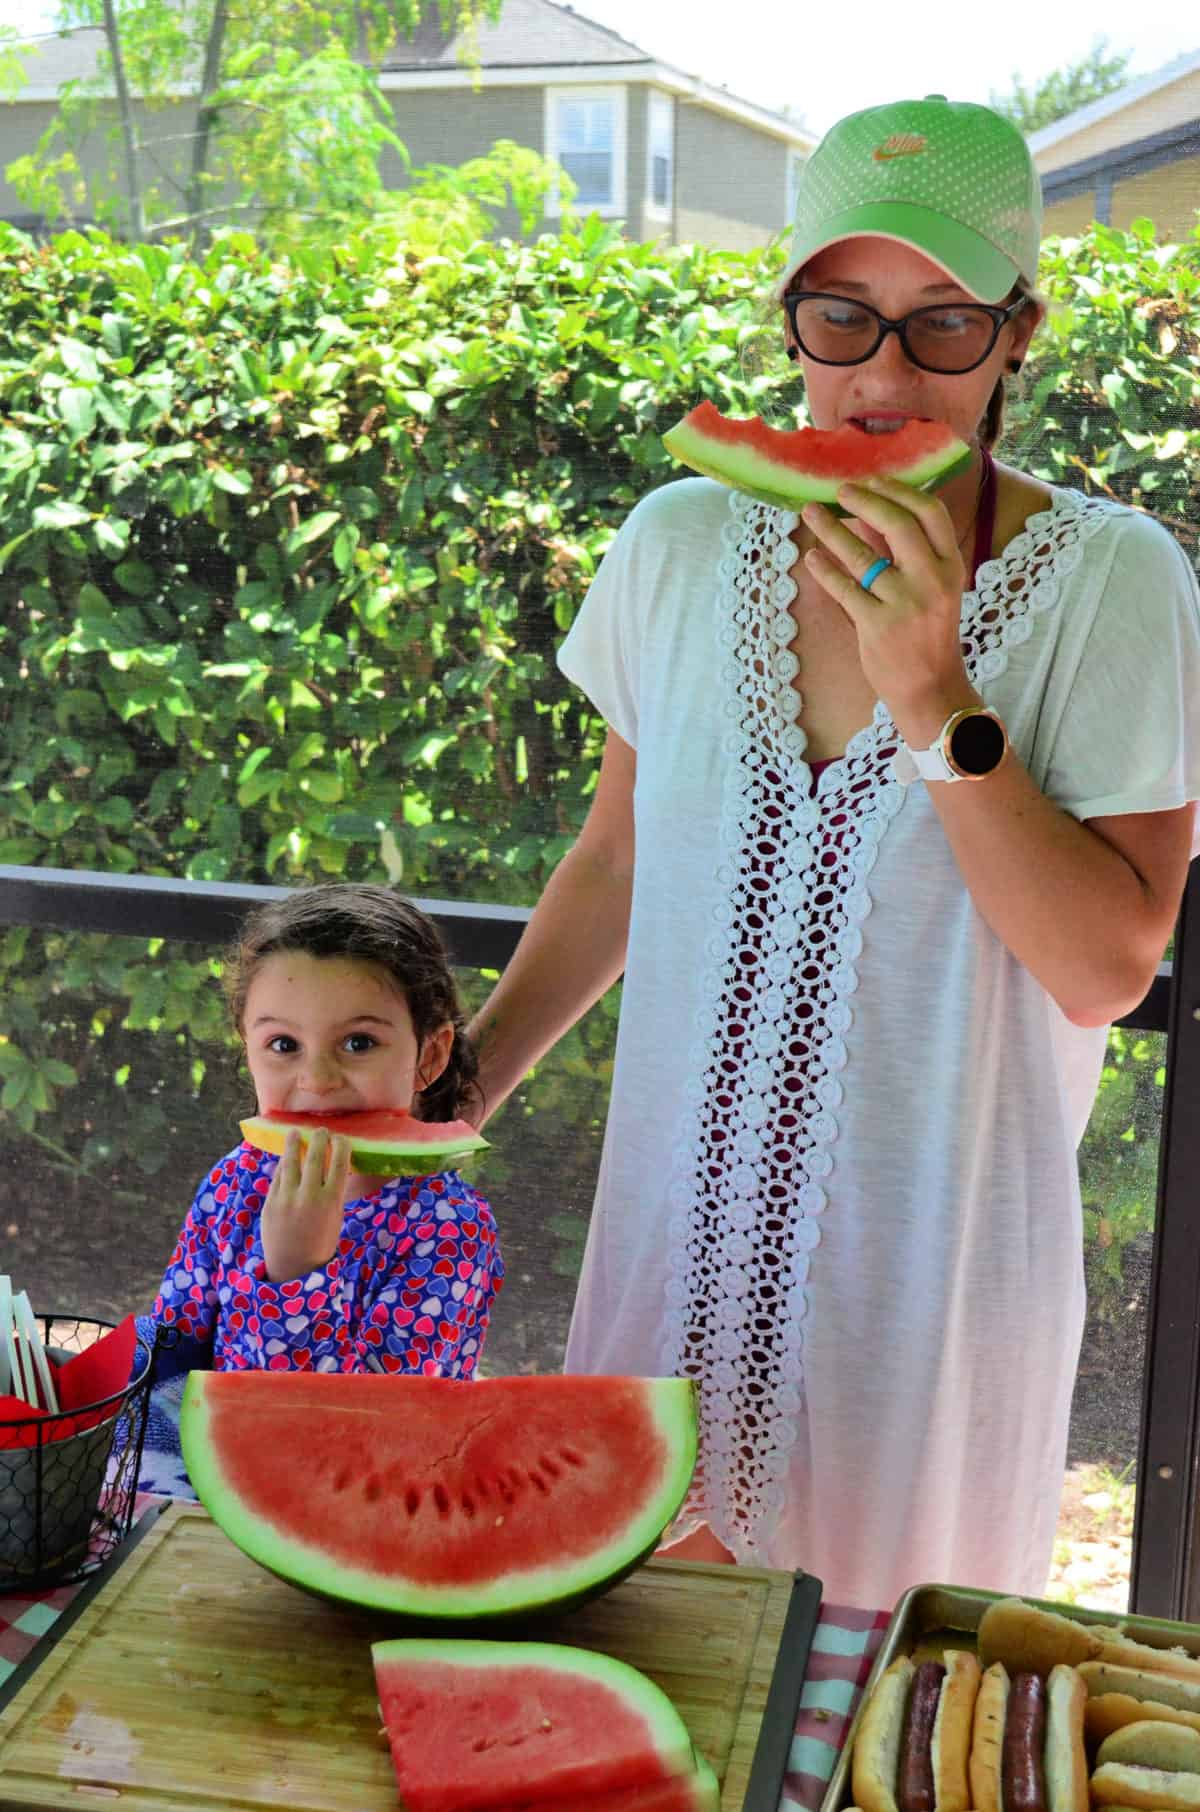 Mother and daughter standing next to eachother, each enjoying a slice of watermelon at picnic table.